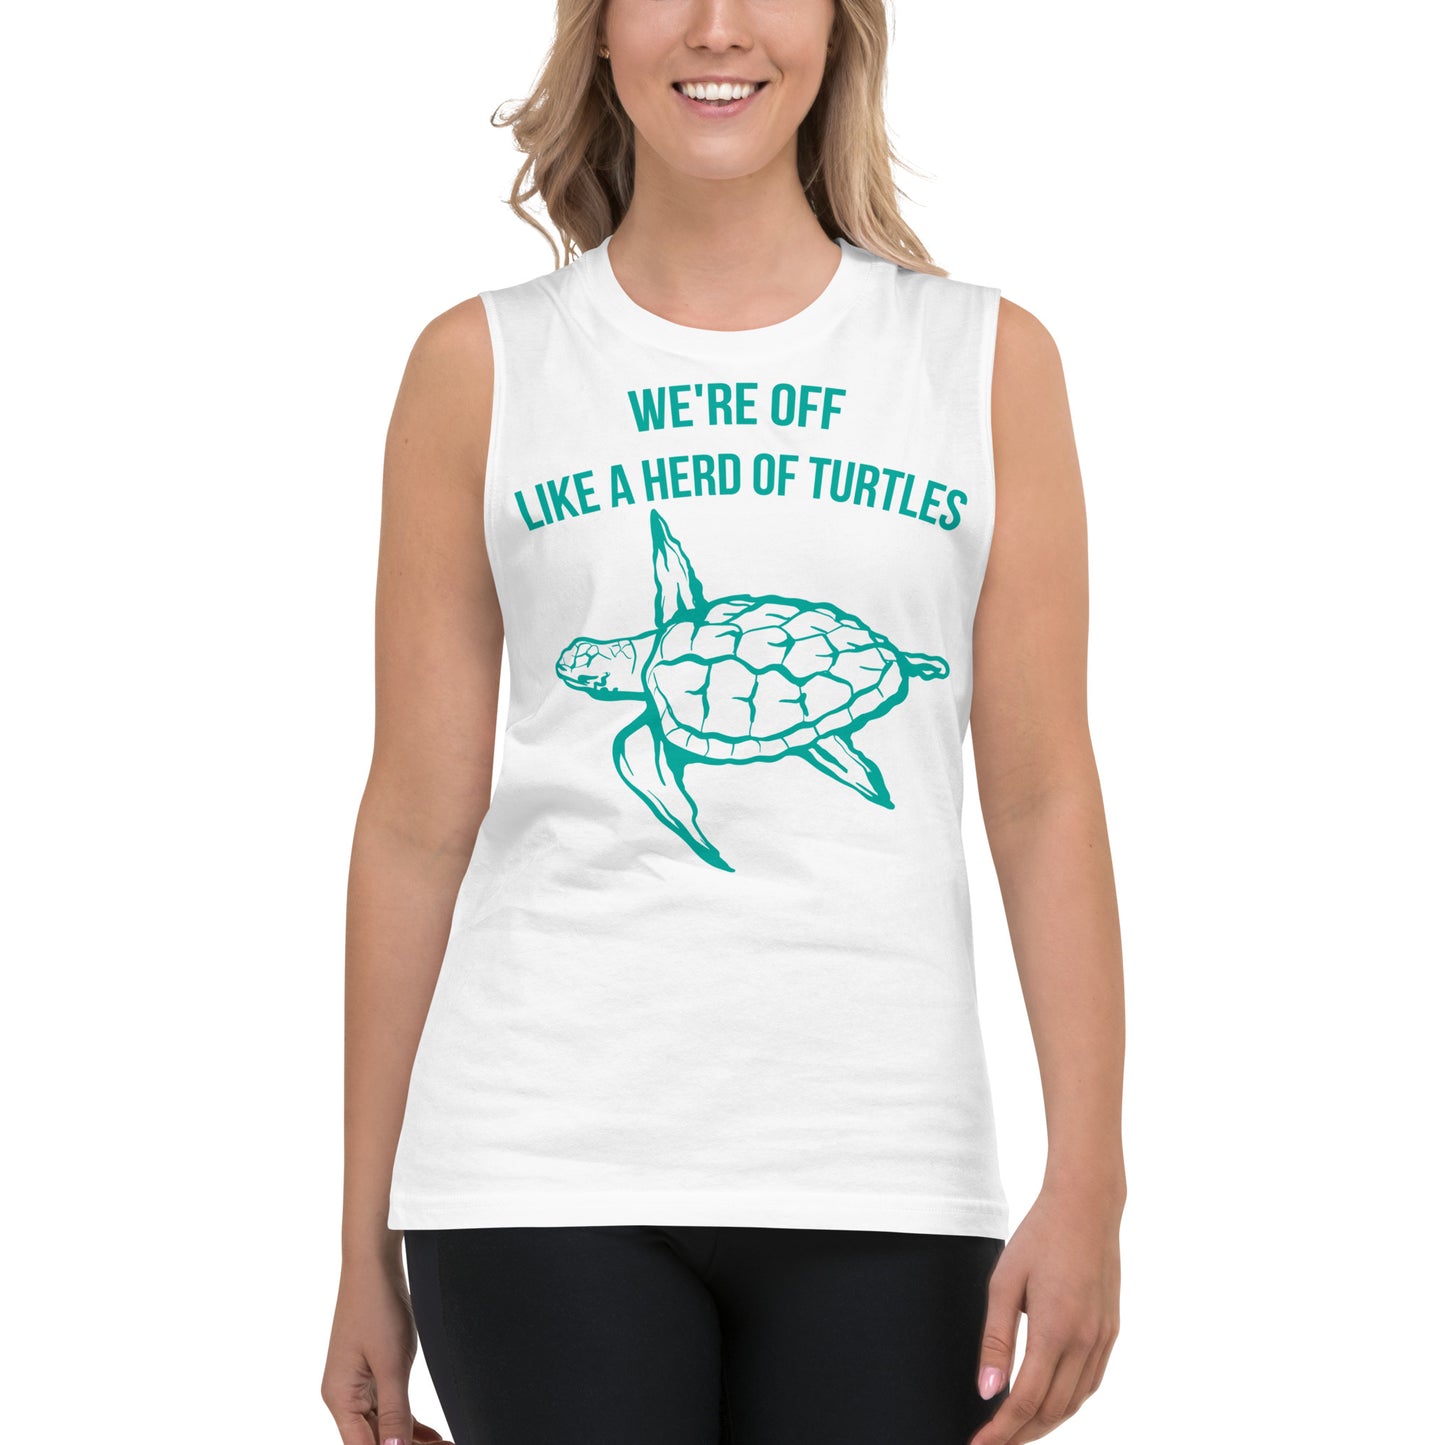 We're off Like a Herd of Turtles / Unisex Muscle Shirt